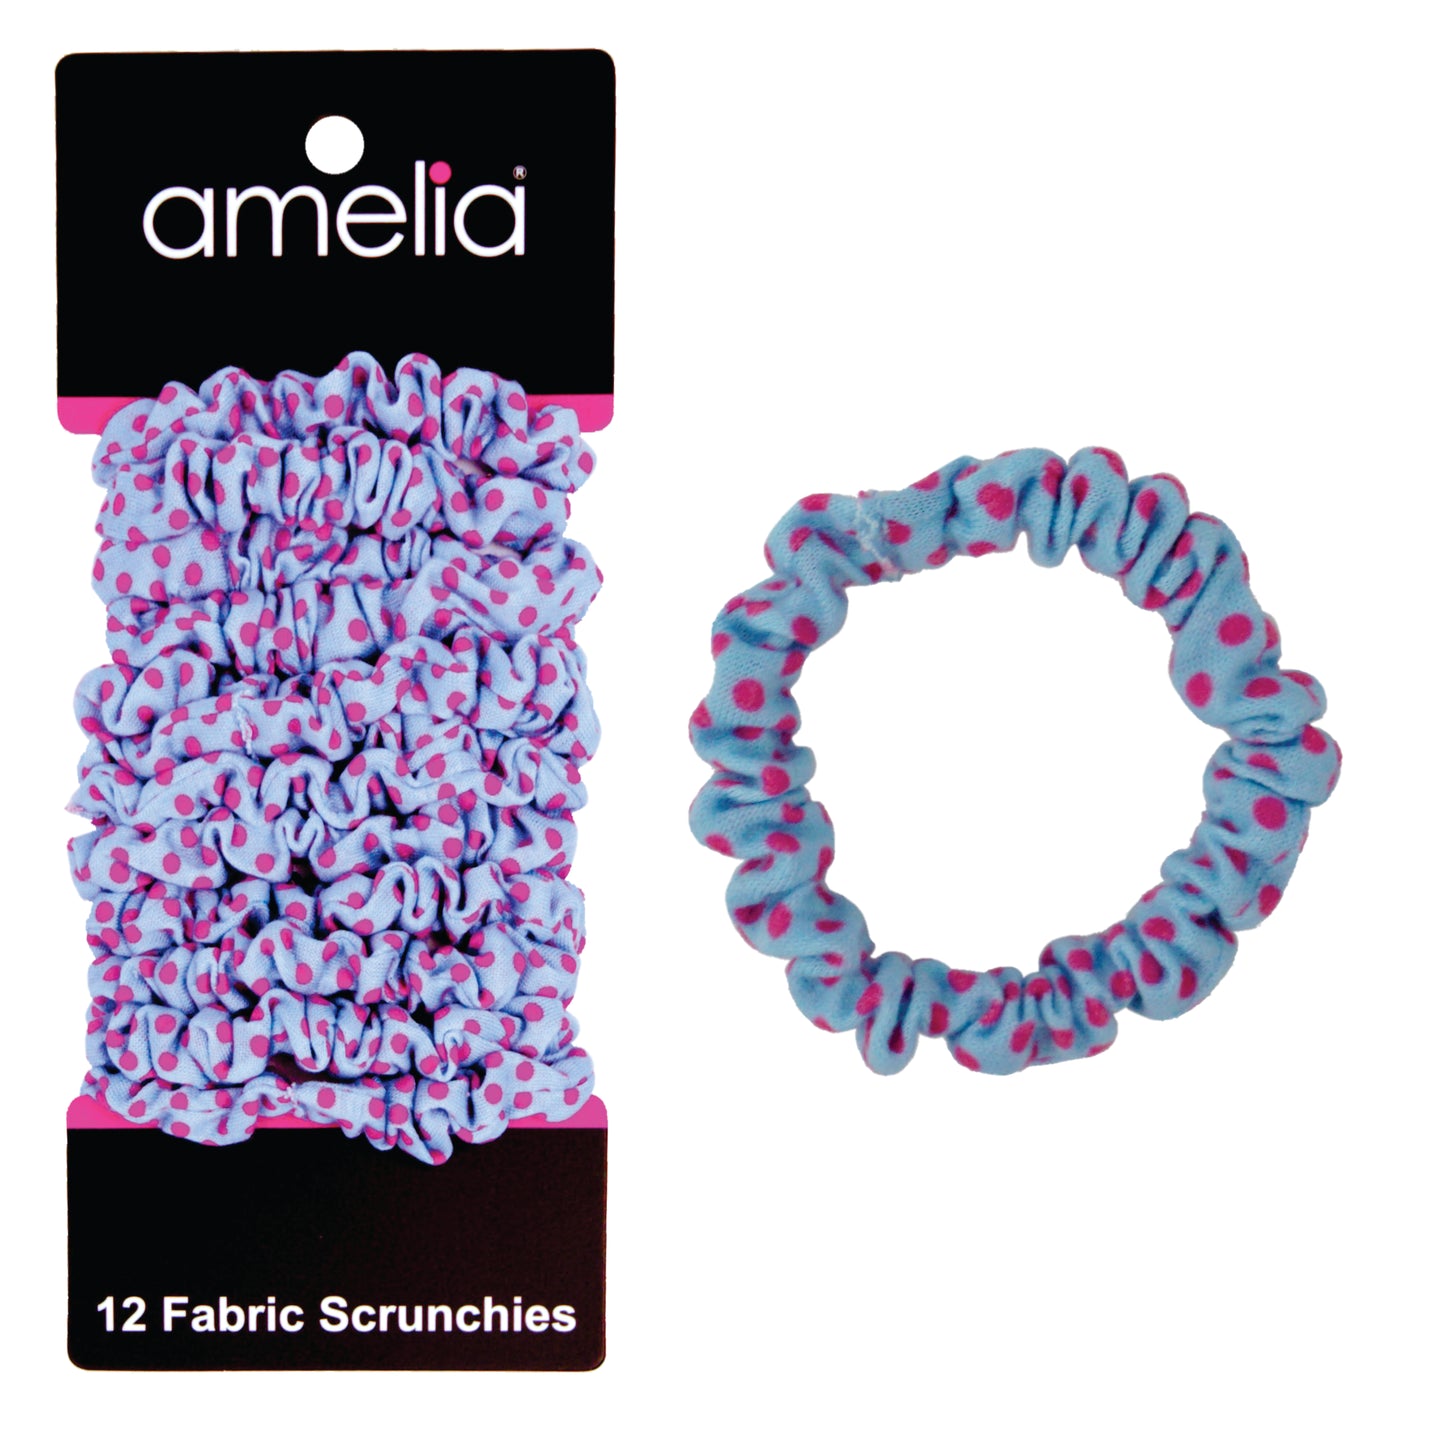 Amelia Beauty, Blue/Pink Dot Jersey Scrunchies, 2.25in Diameter, Gentle on Hair, Strong Hold, No Snag, No Dents or Creases. 12 Pack